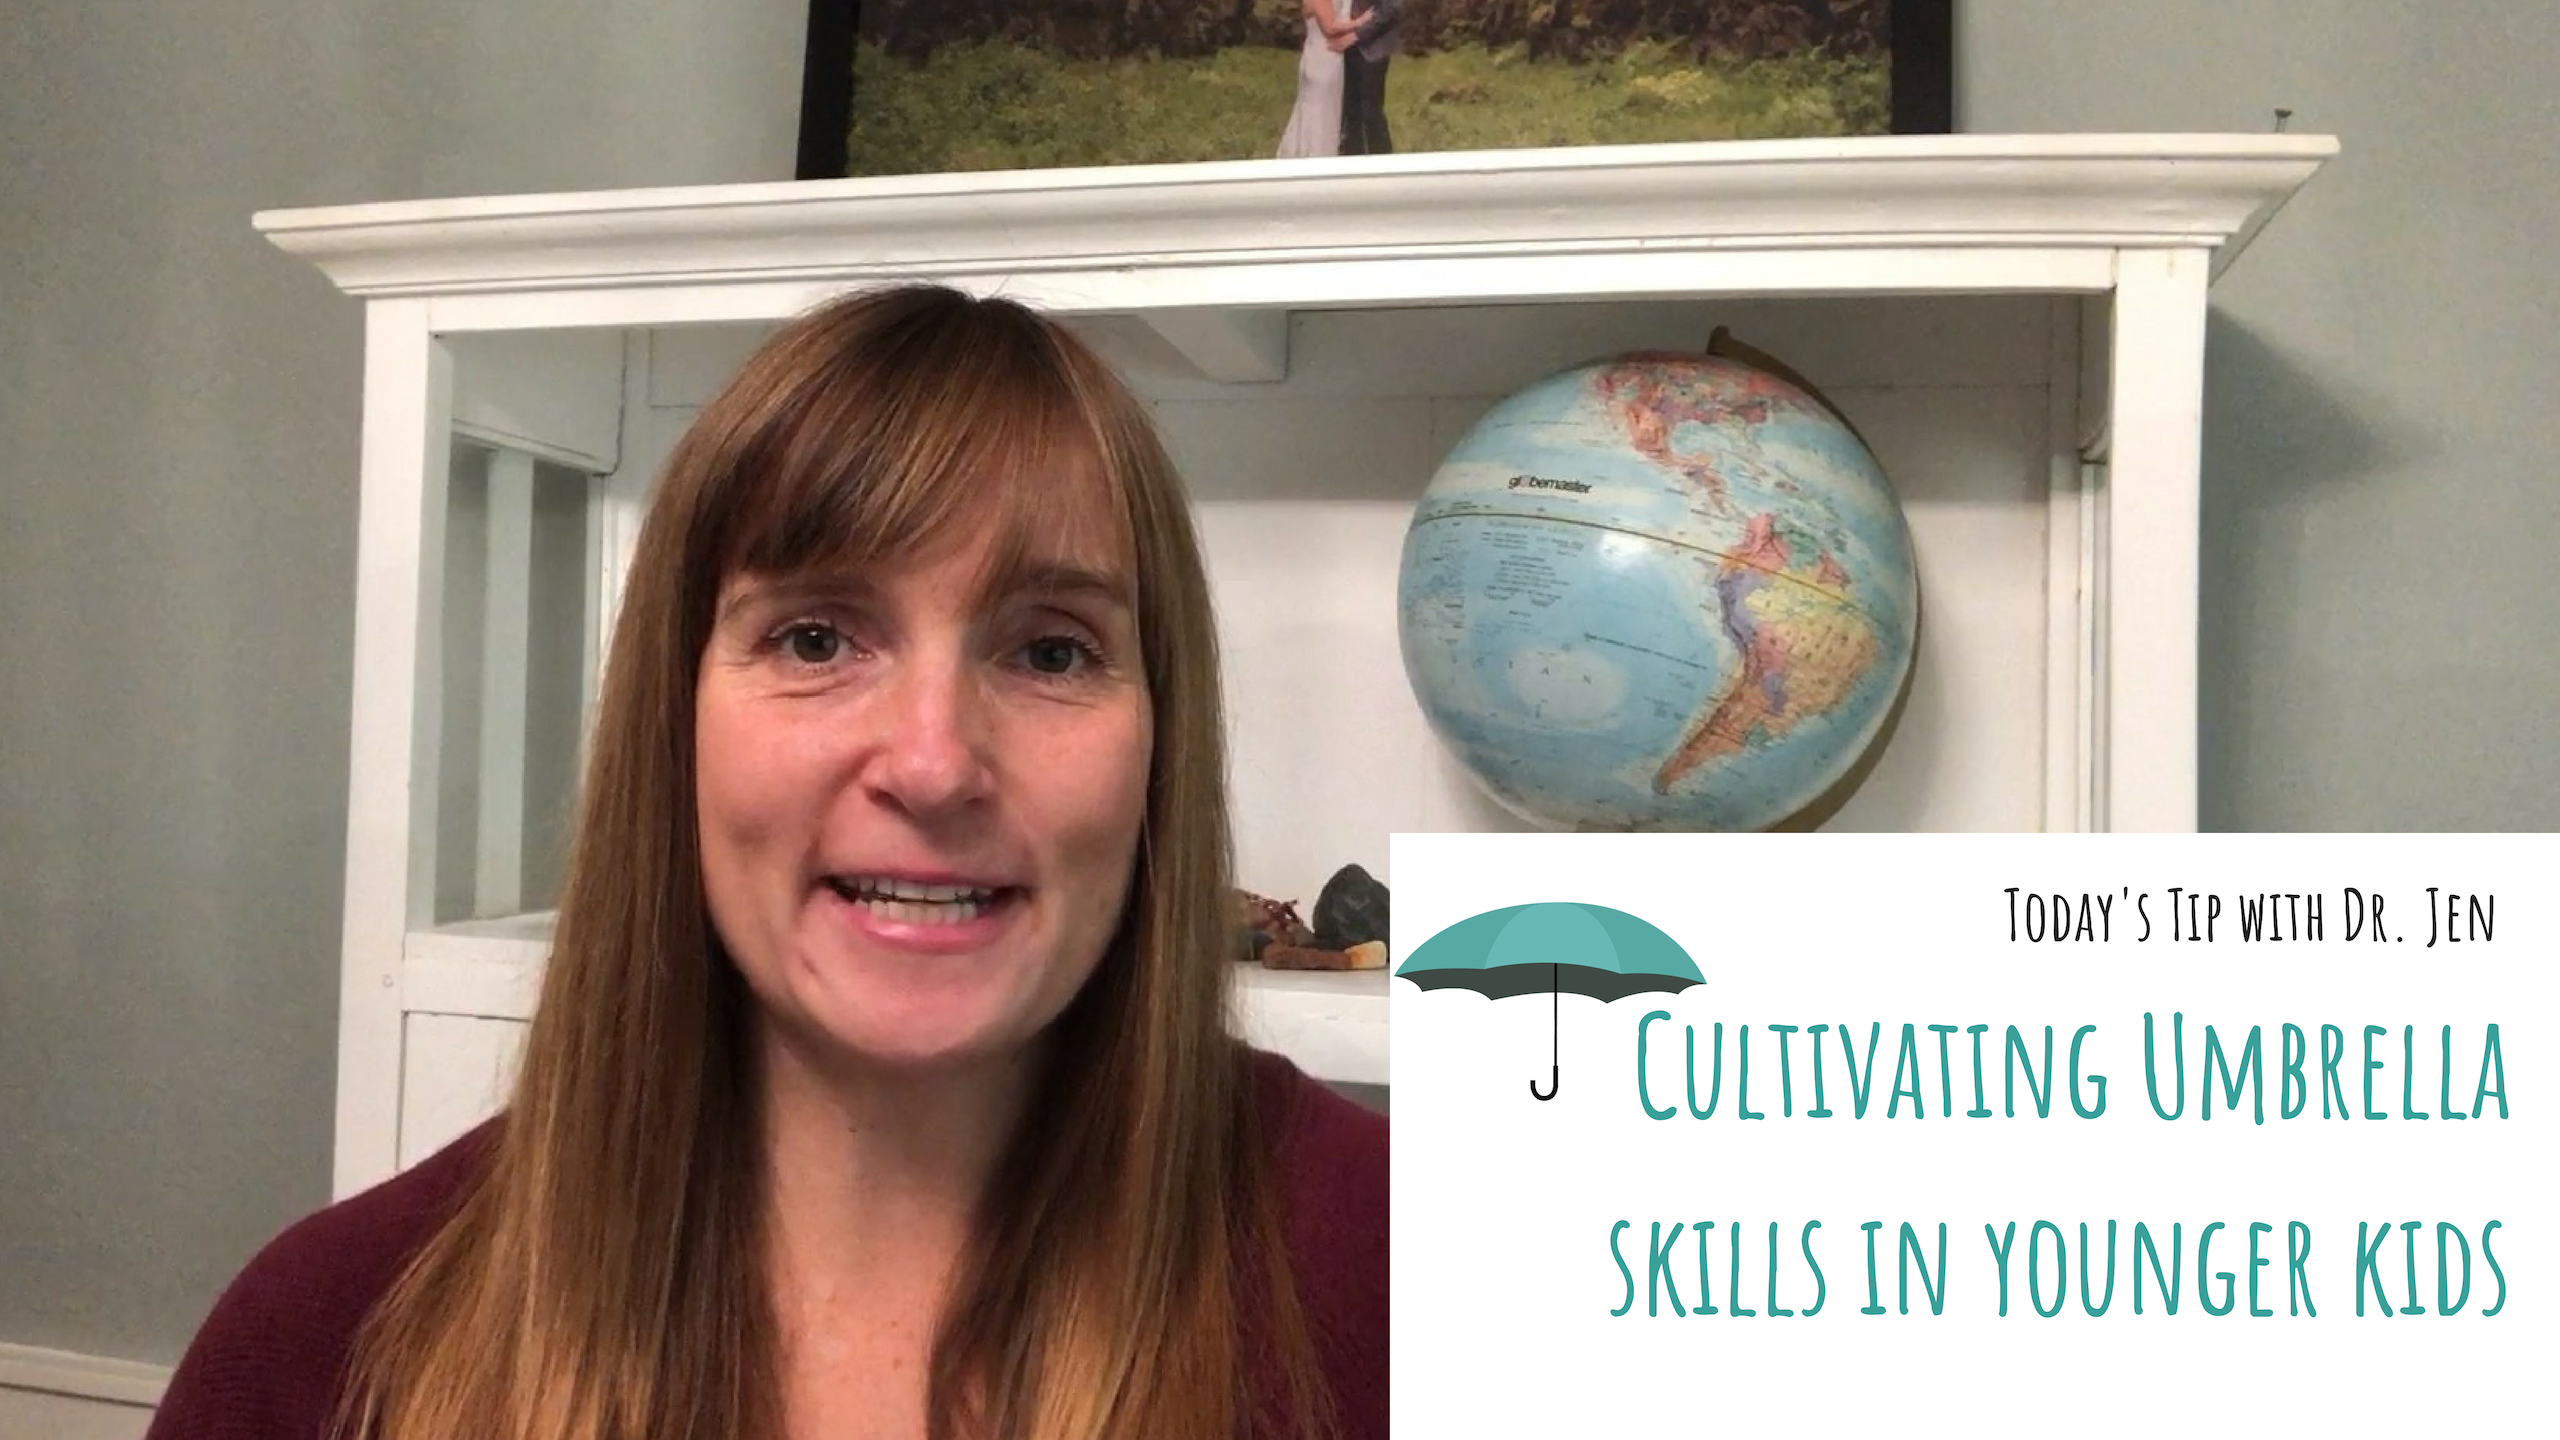 Today’s Tip with Dr. Jen: Cultivating Umbrella Skills in Younger Kids